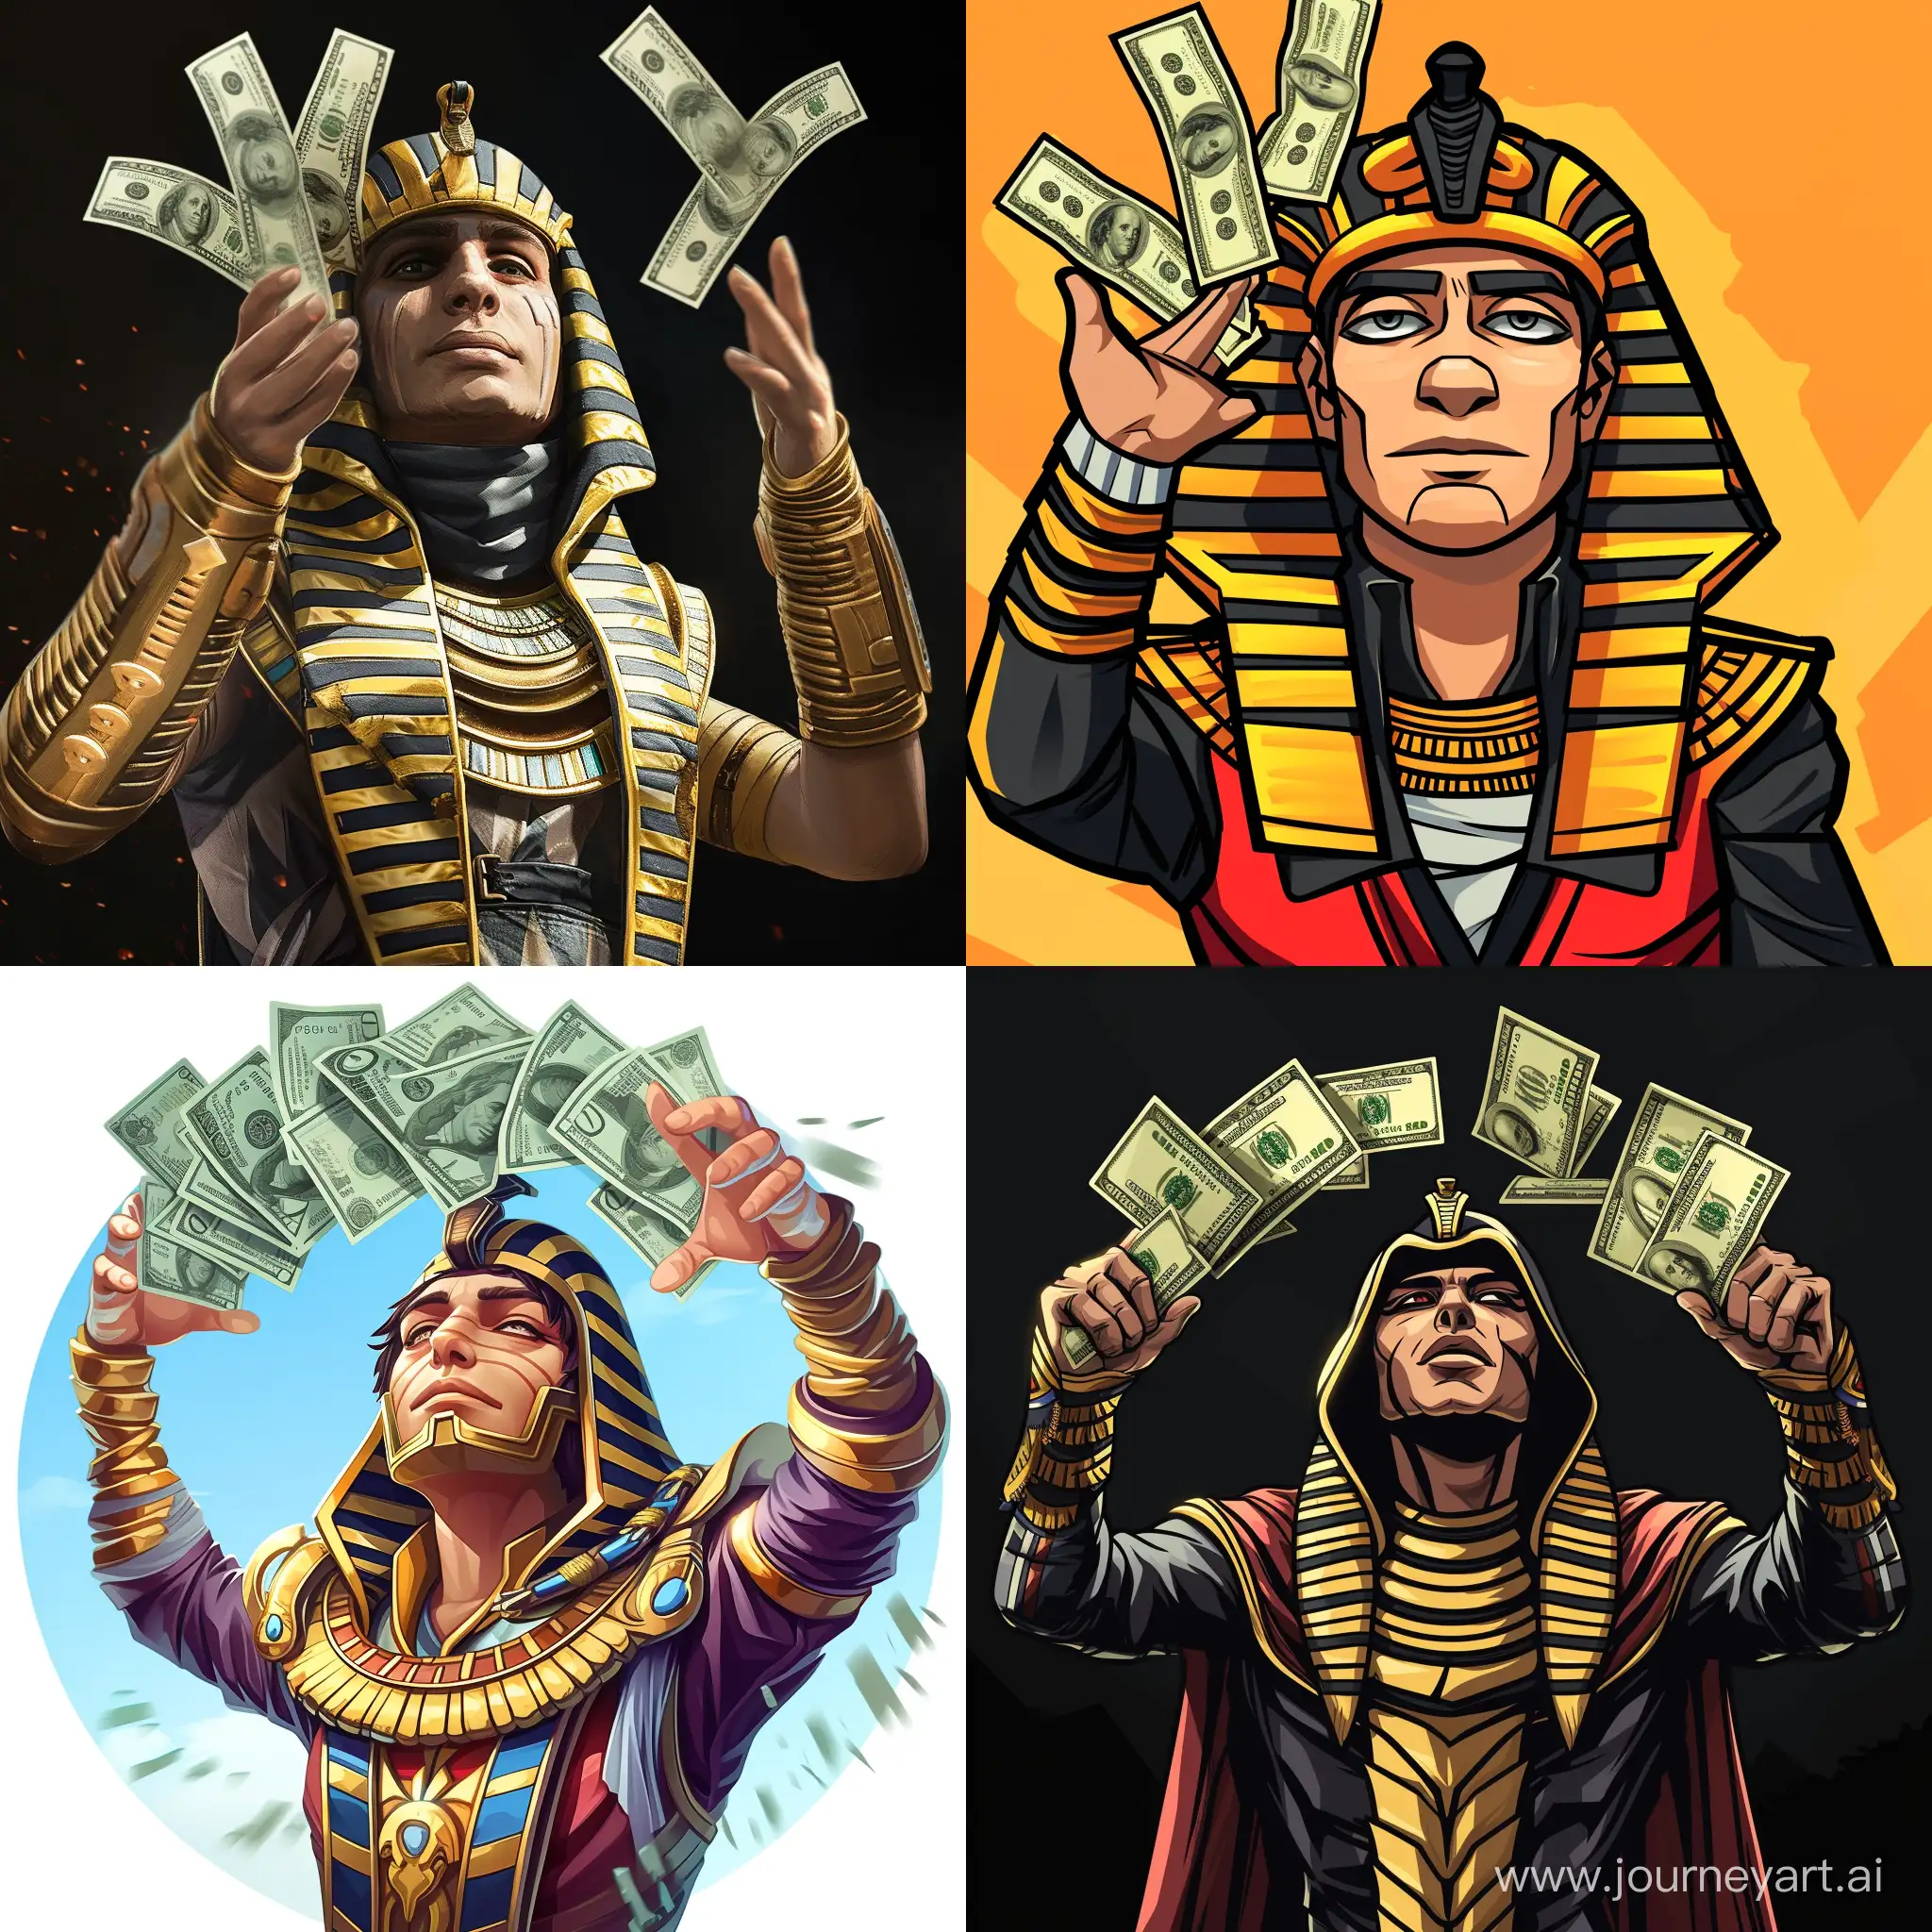 Pharaoh-X-from-PUBG-Mobile-Showering-UC-Currency-with-Intensity